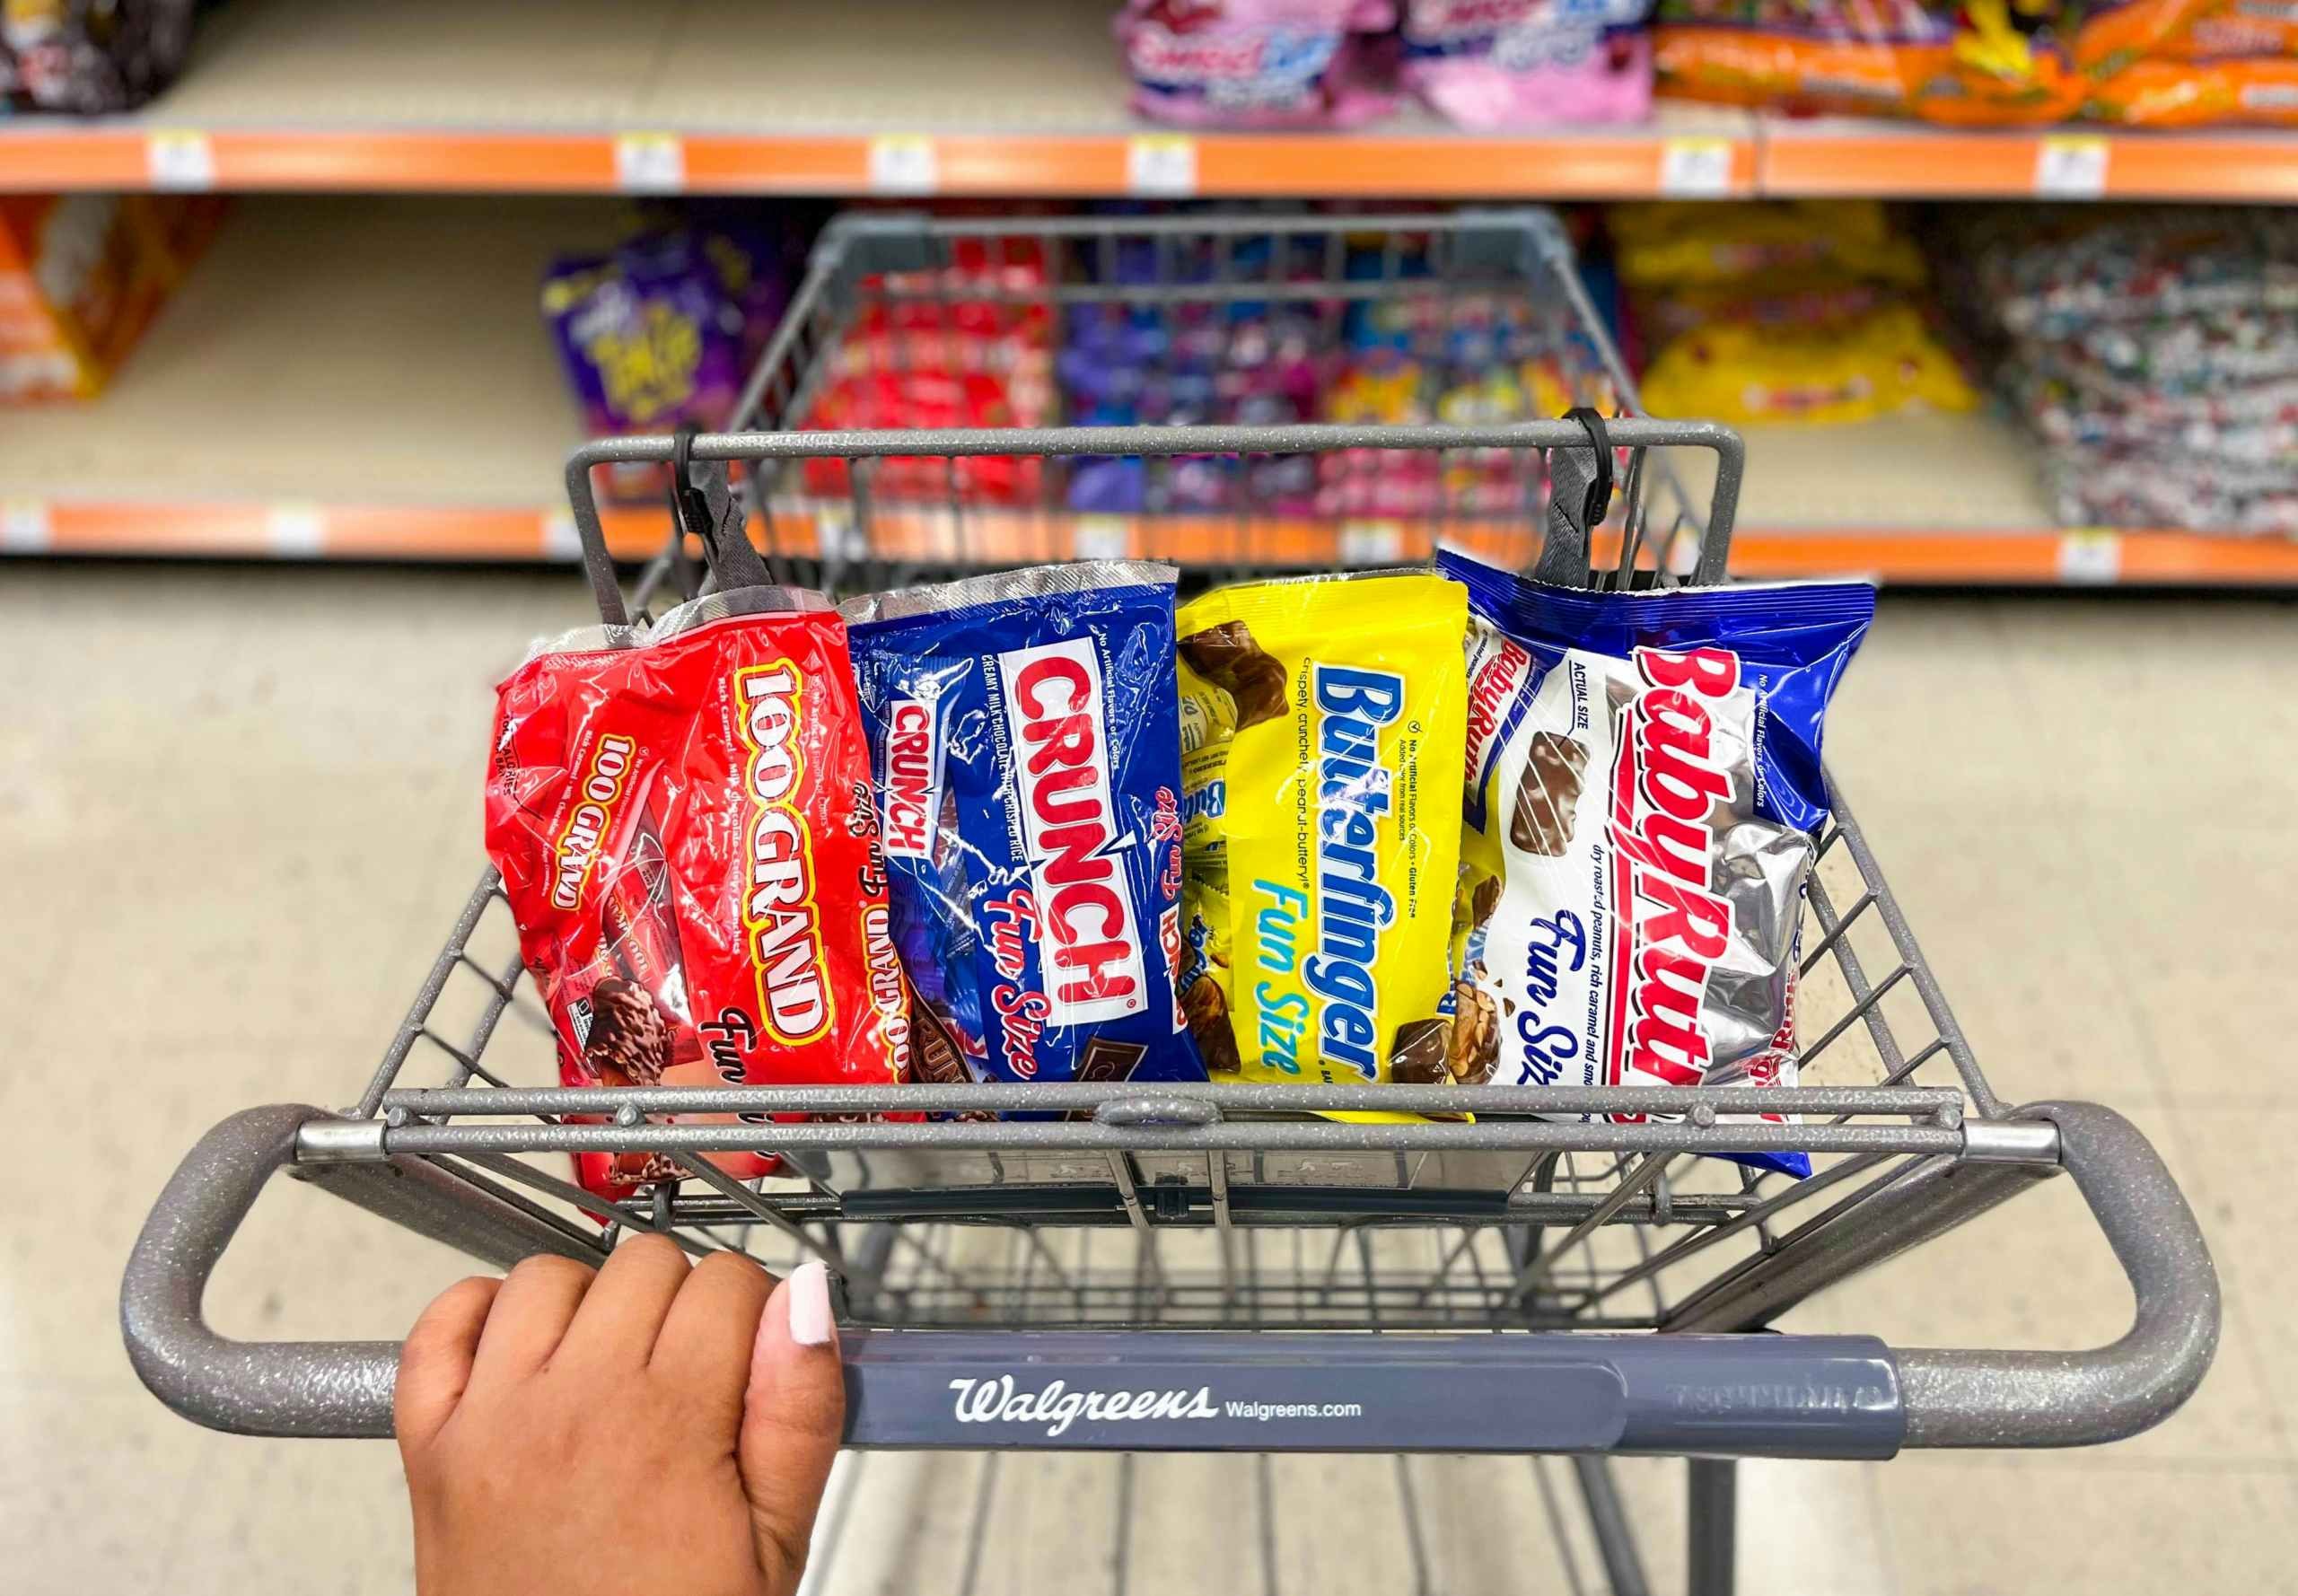 hand on shopping cart with a bag of Baby Ruth, Crunch, 100 Grand, and Butterfinger inside